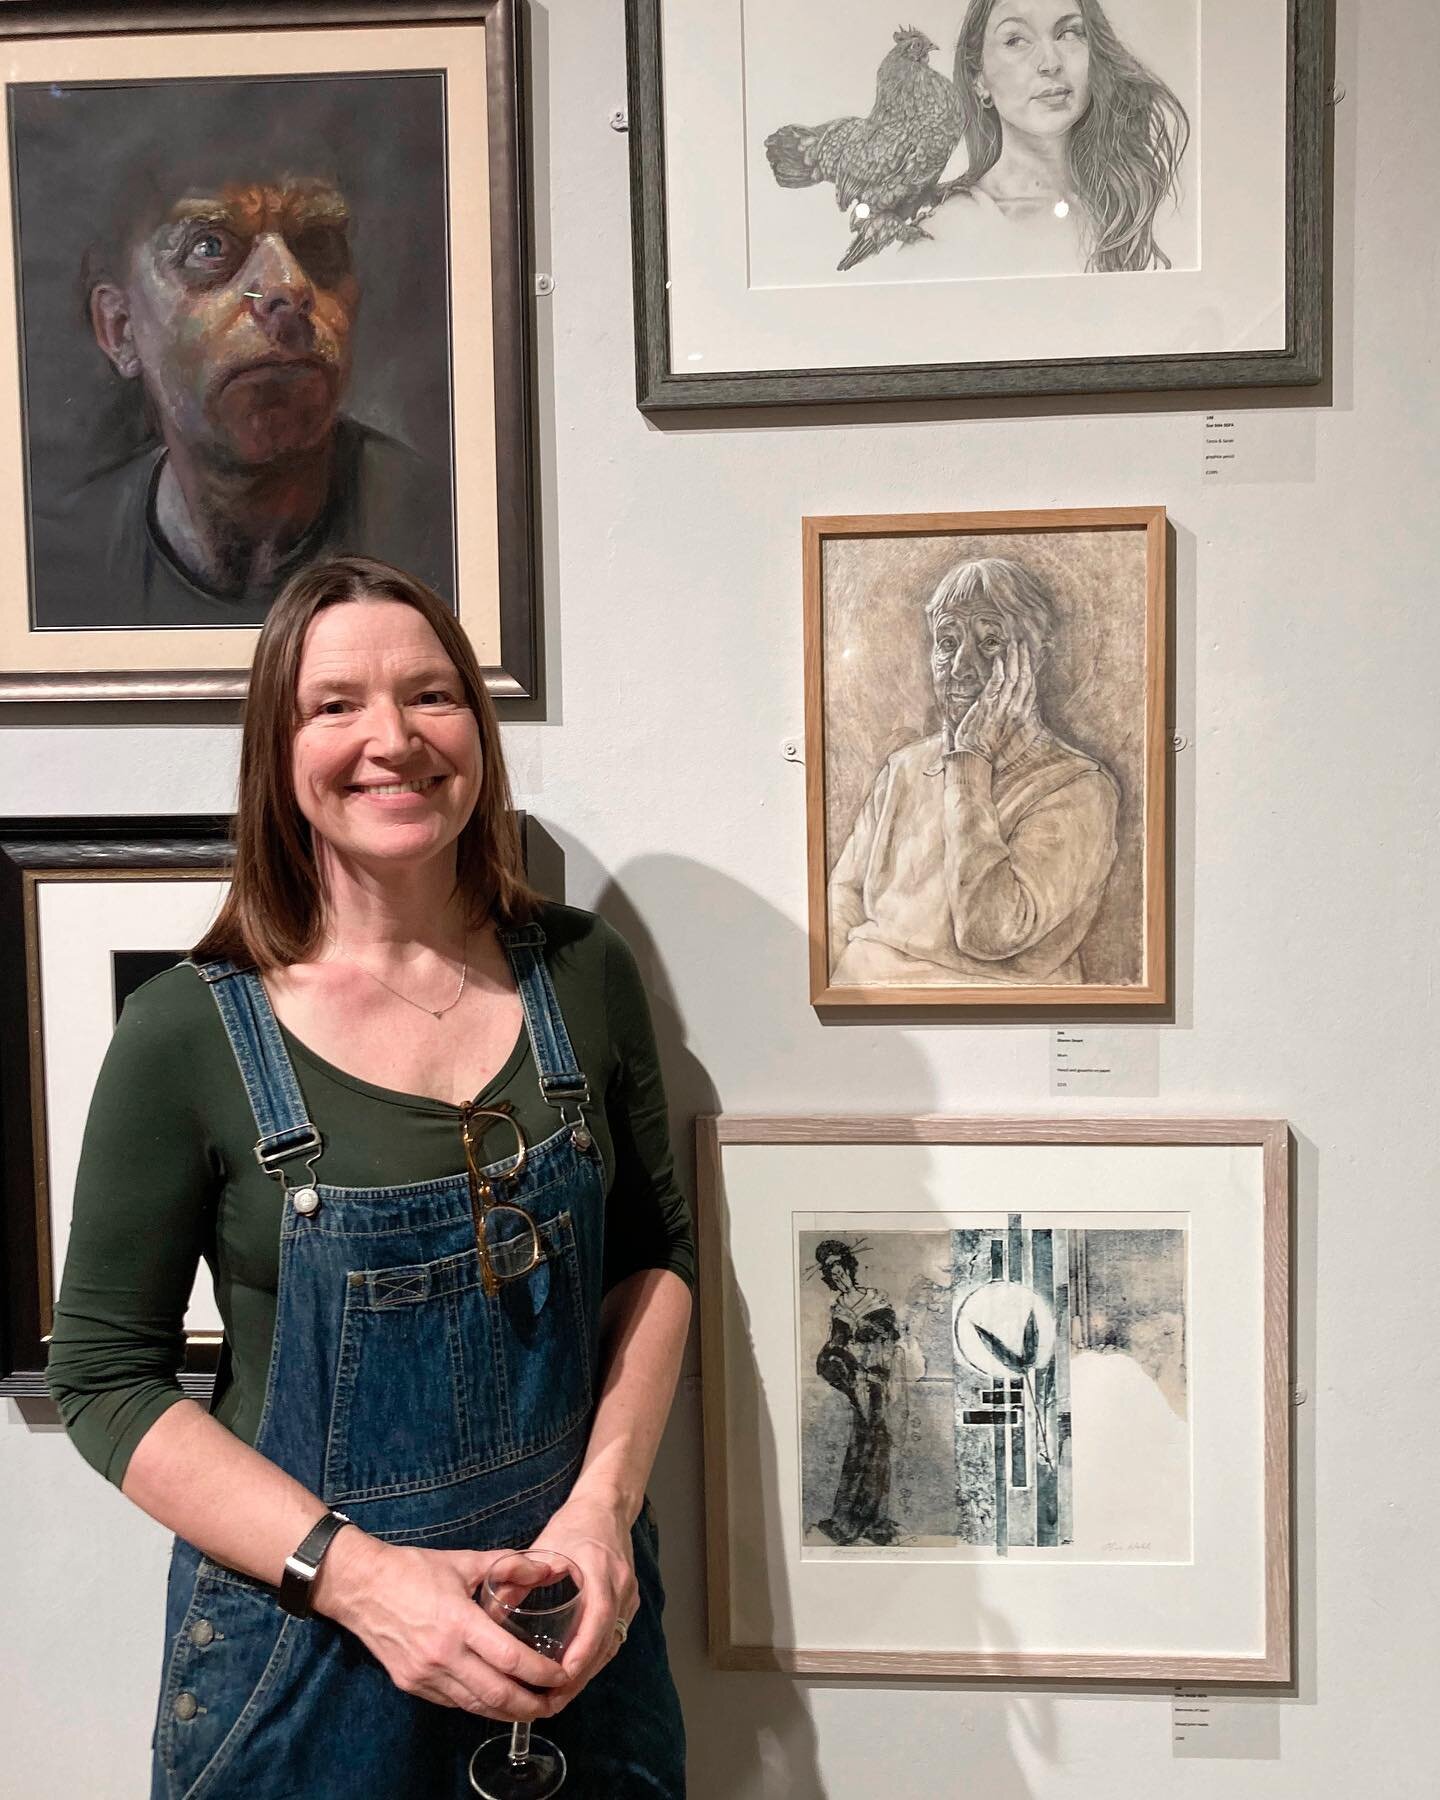 It was lovely to see mum on the wall at last night&rsquo;s @drawingsocietyuk private view. This exhibition continues until 16th March at @mallgalleries with lots of fabulous work to enjoy!